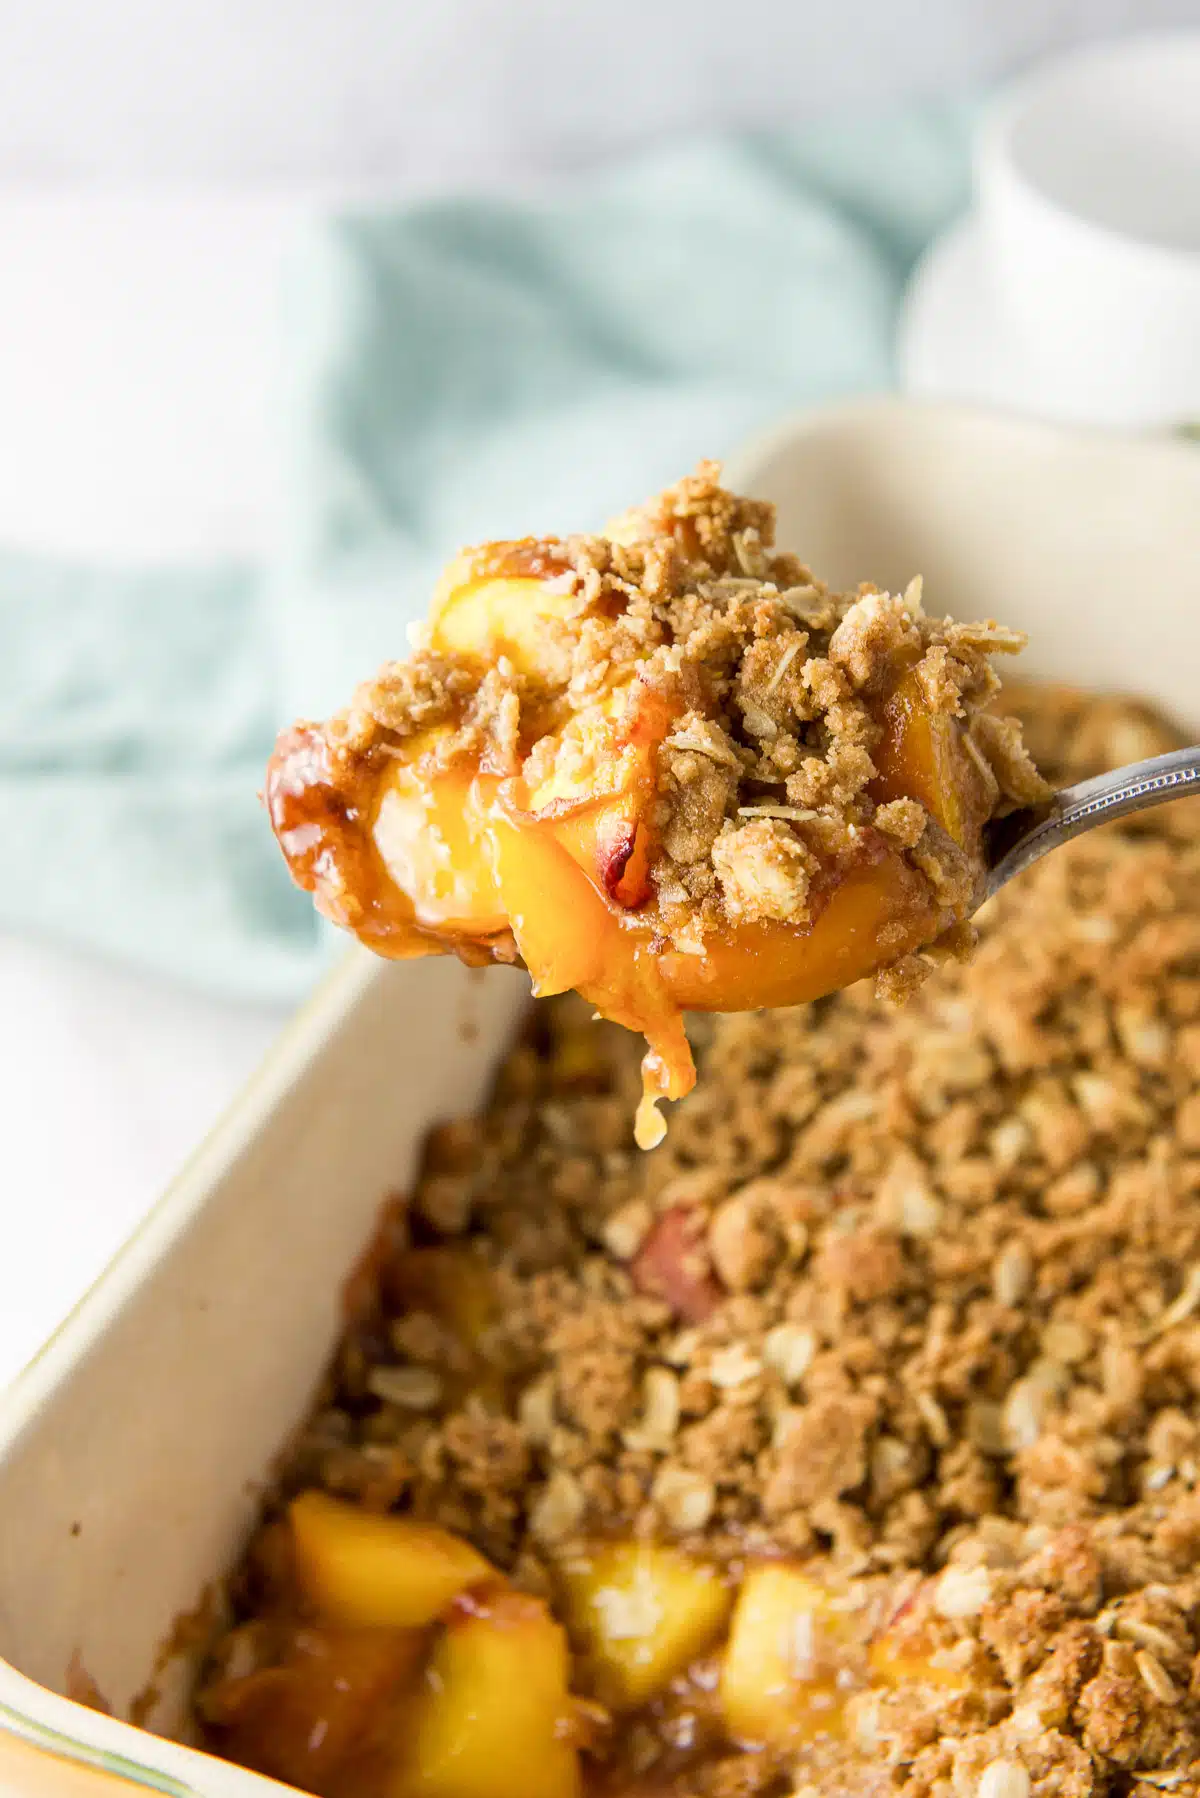 A big spoonful of peaches with crumble topping held over the baking dish